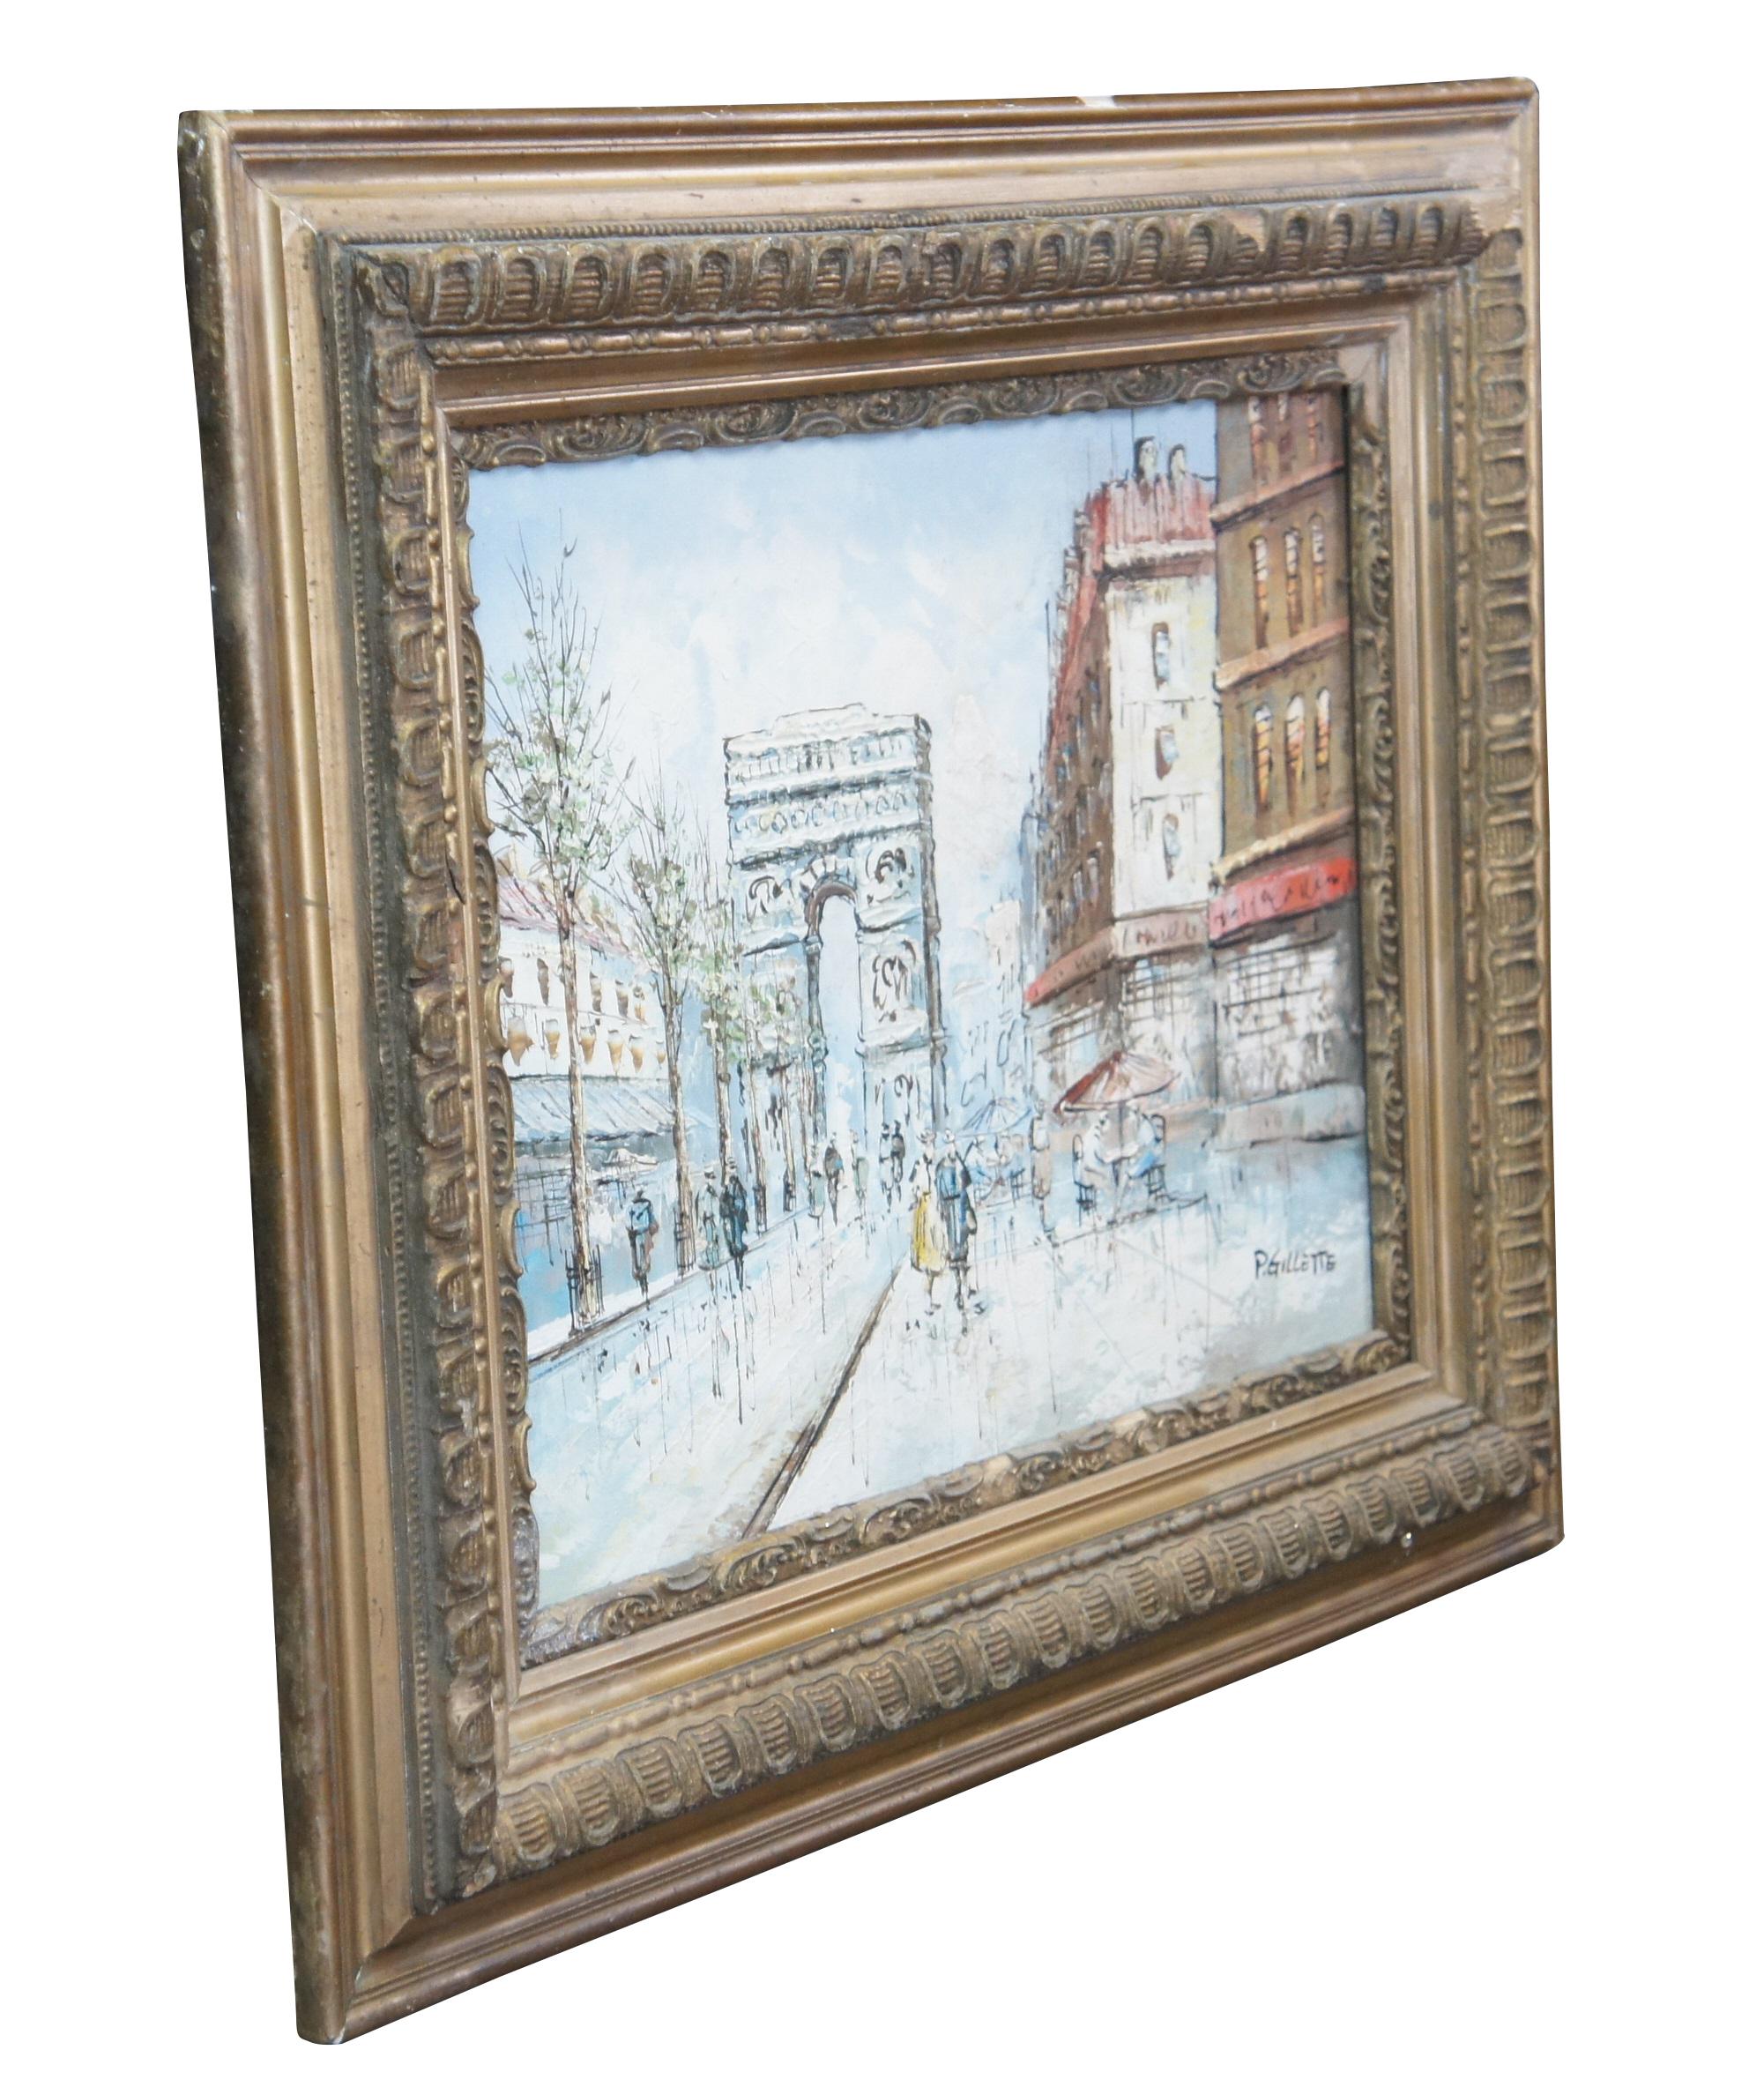 P. Gillette late 20th century French Impressionist cityscape Painting.  The oil on canvas features the Arc De Triomphe in Paris and is signed lower right.  The painting is framed in gold with ornate detail.

Dimensions:
29